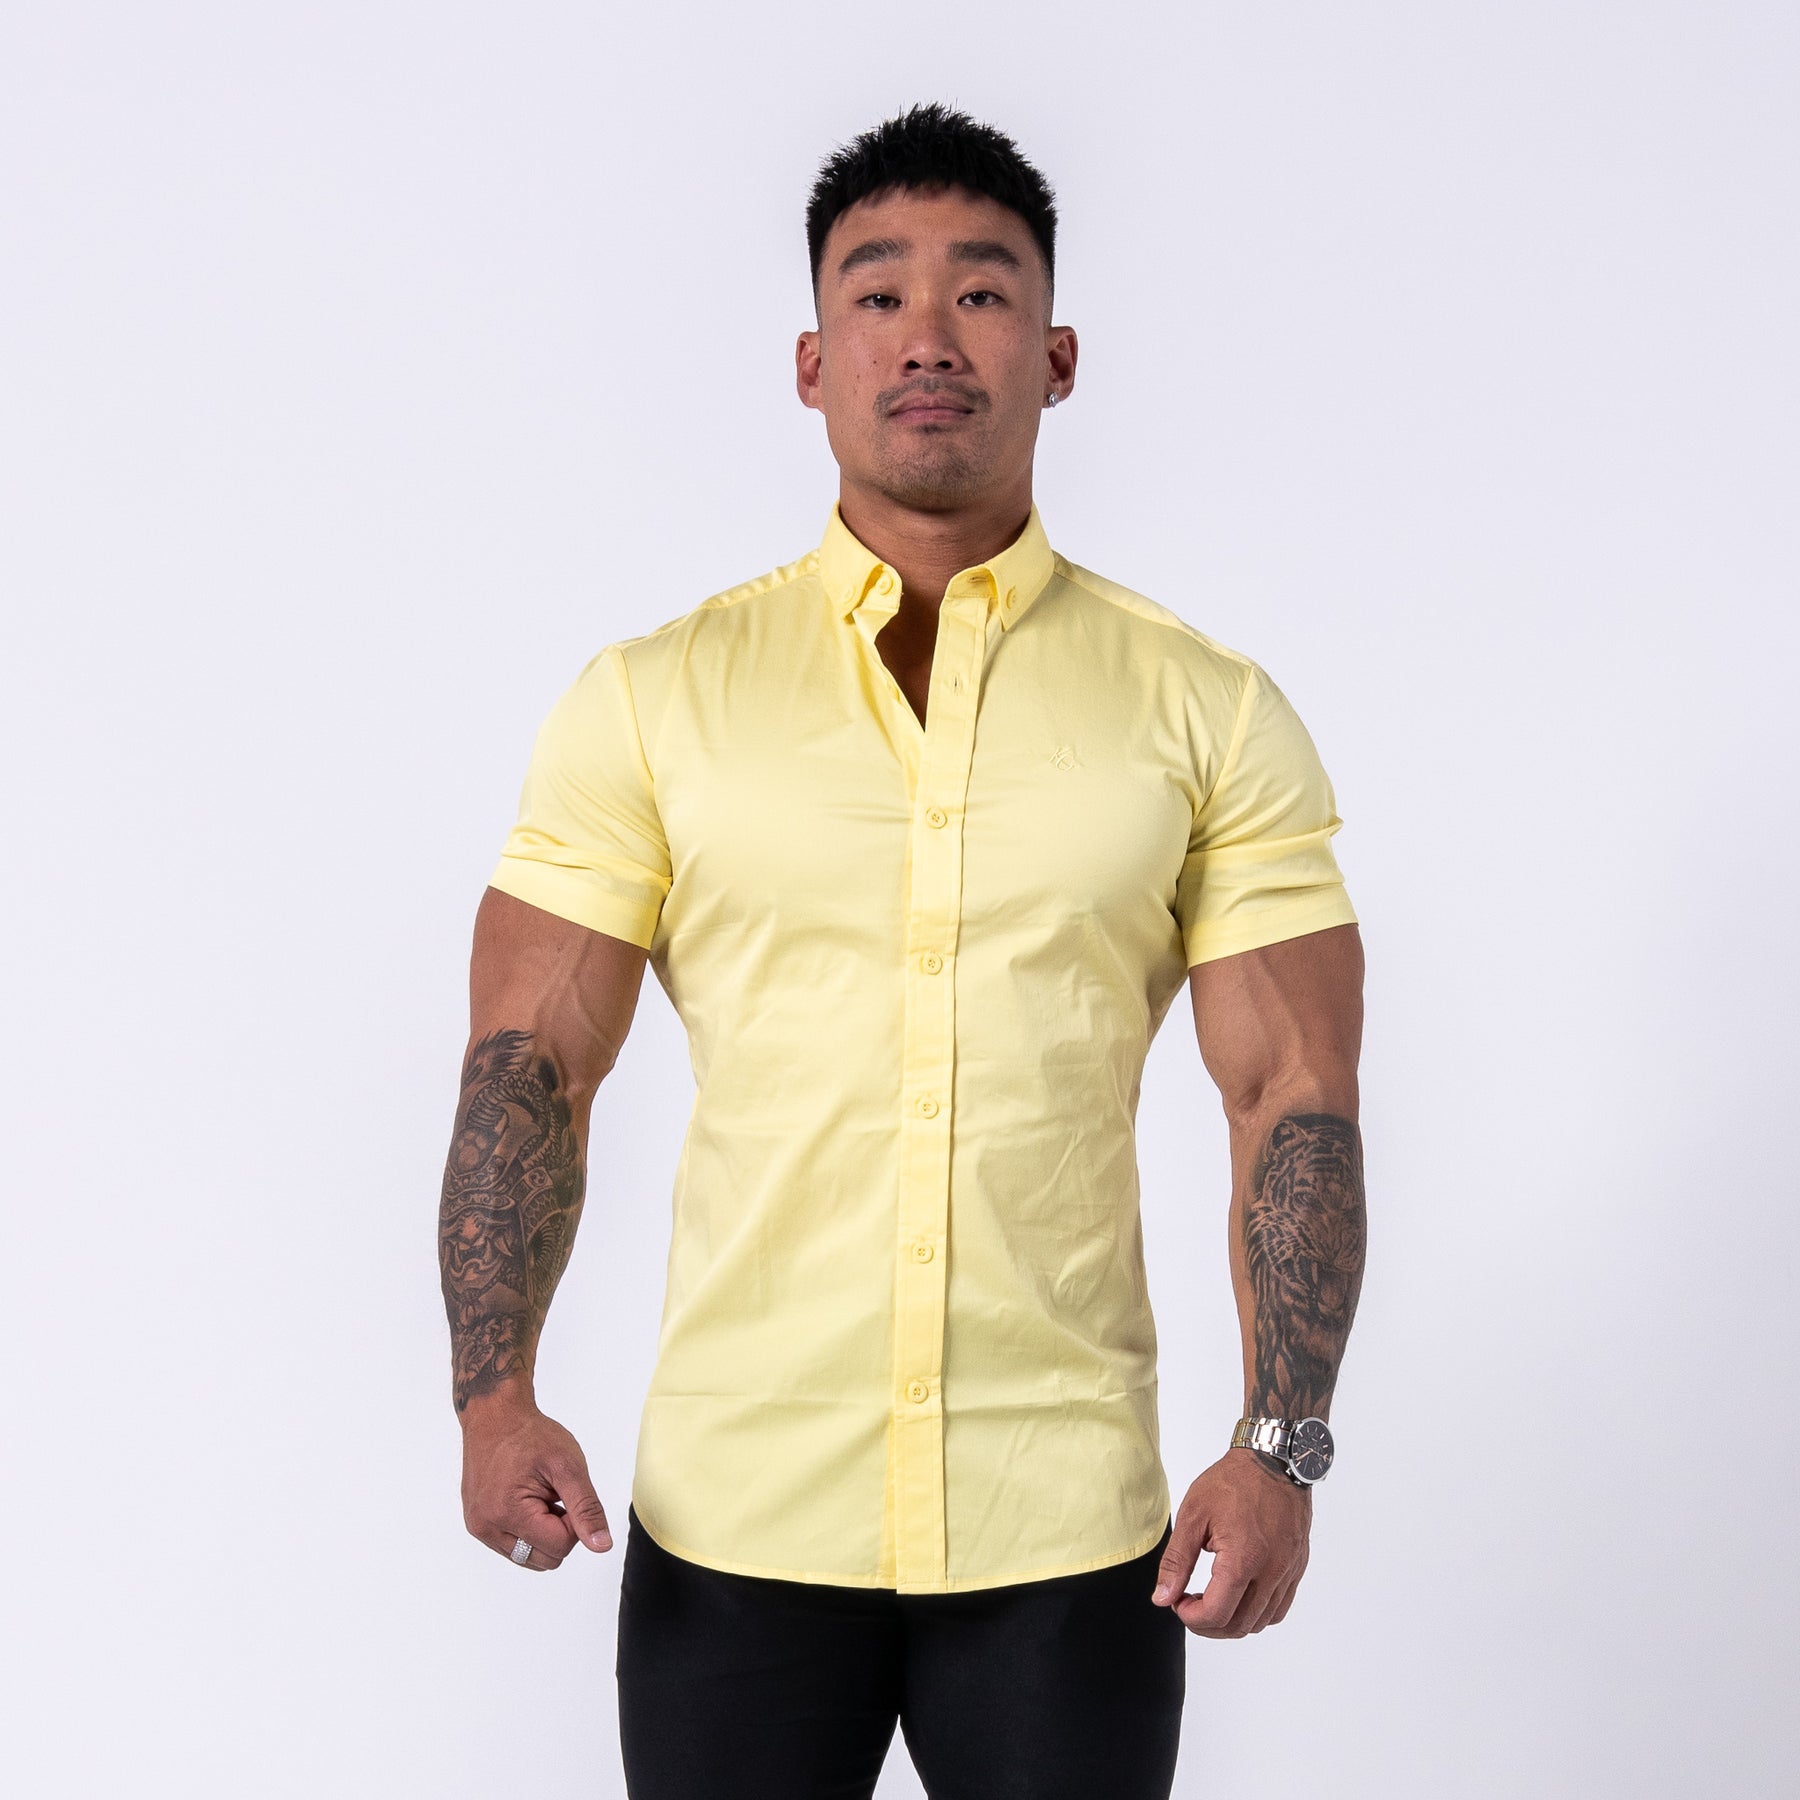 Men's Muscle Fit Short Sleeve Shirt V2 - Yellow